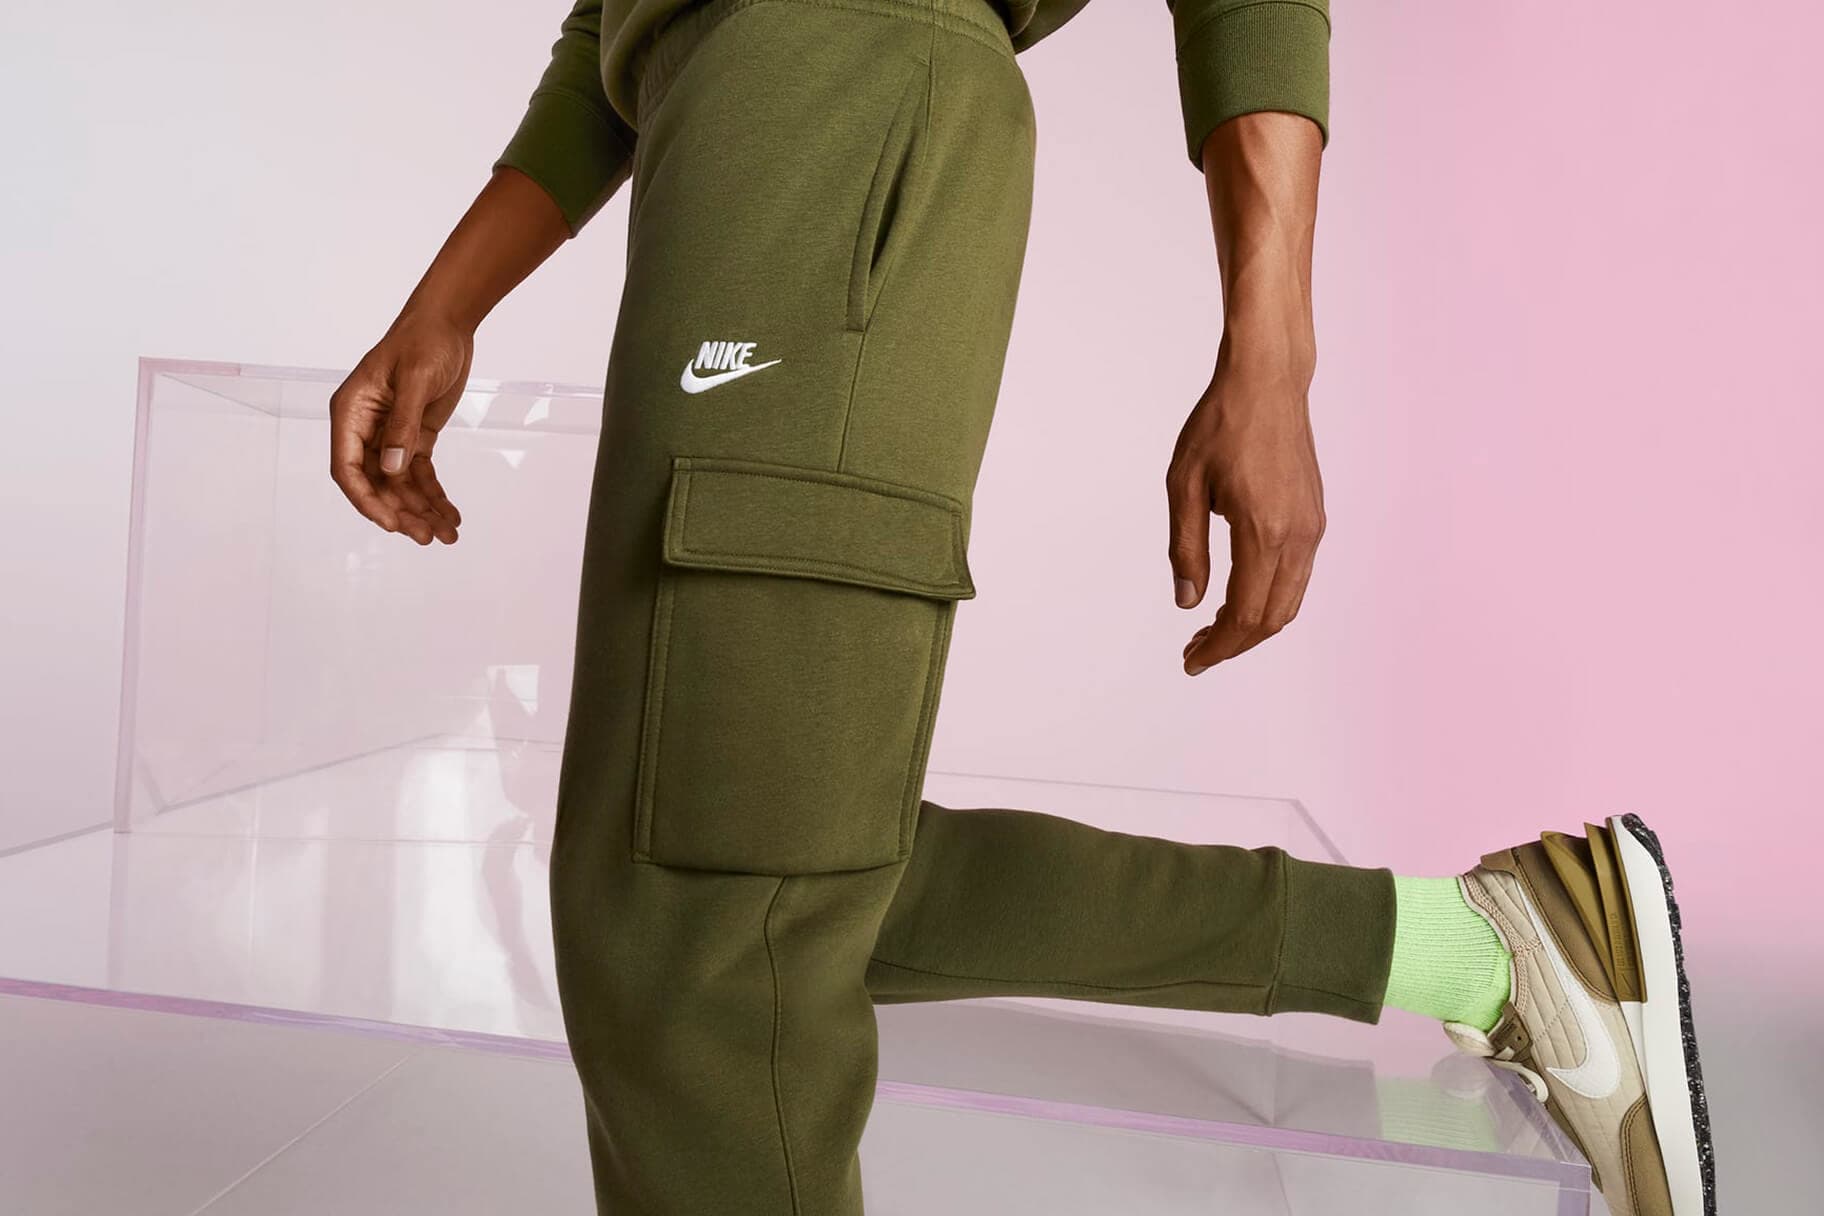 dans Falde sammen dyd The Best Cargo Pants and Shorts by Nike. Nike.com